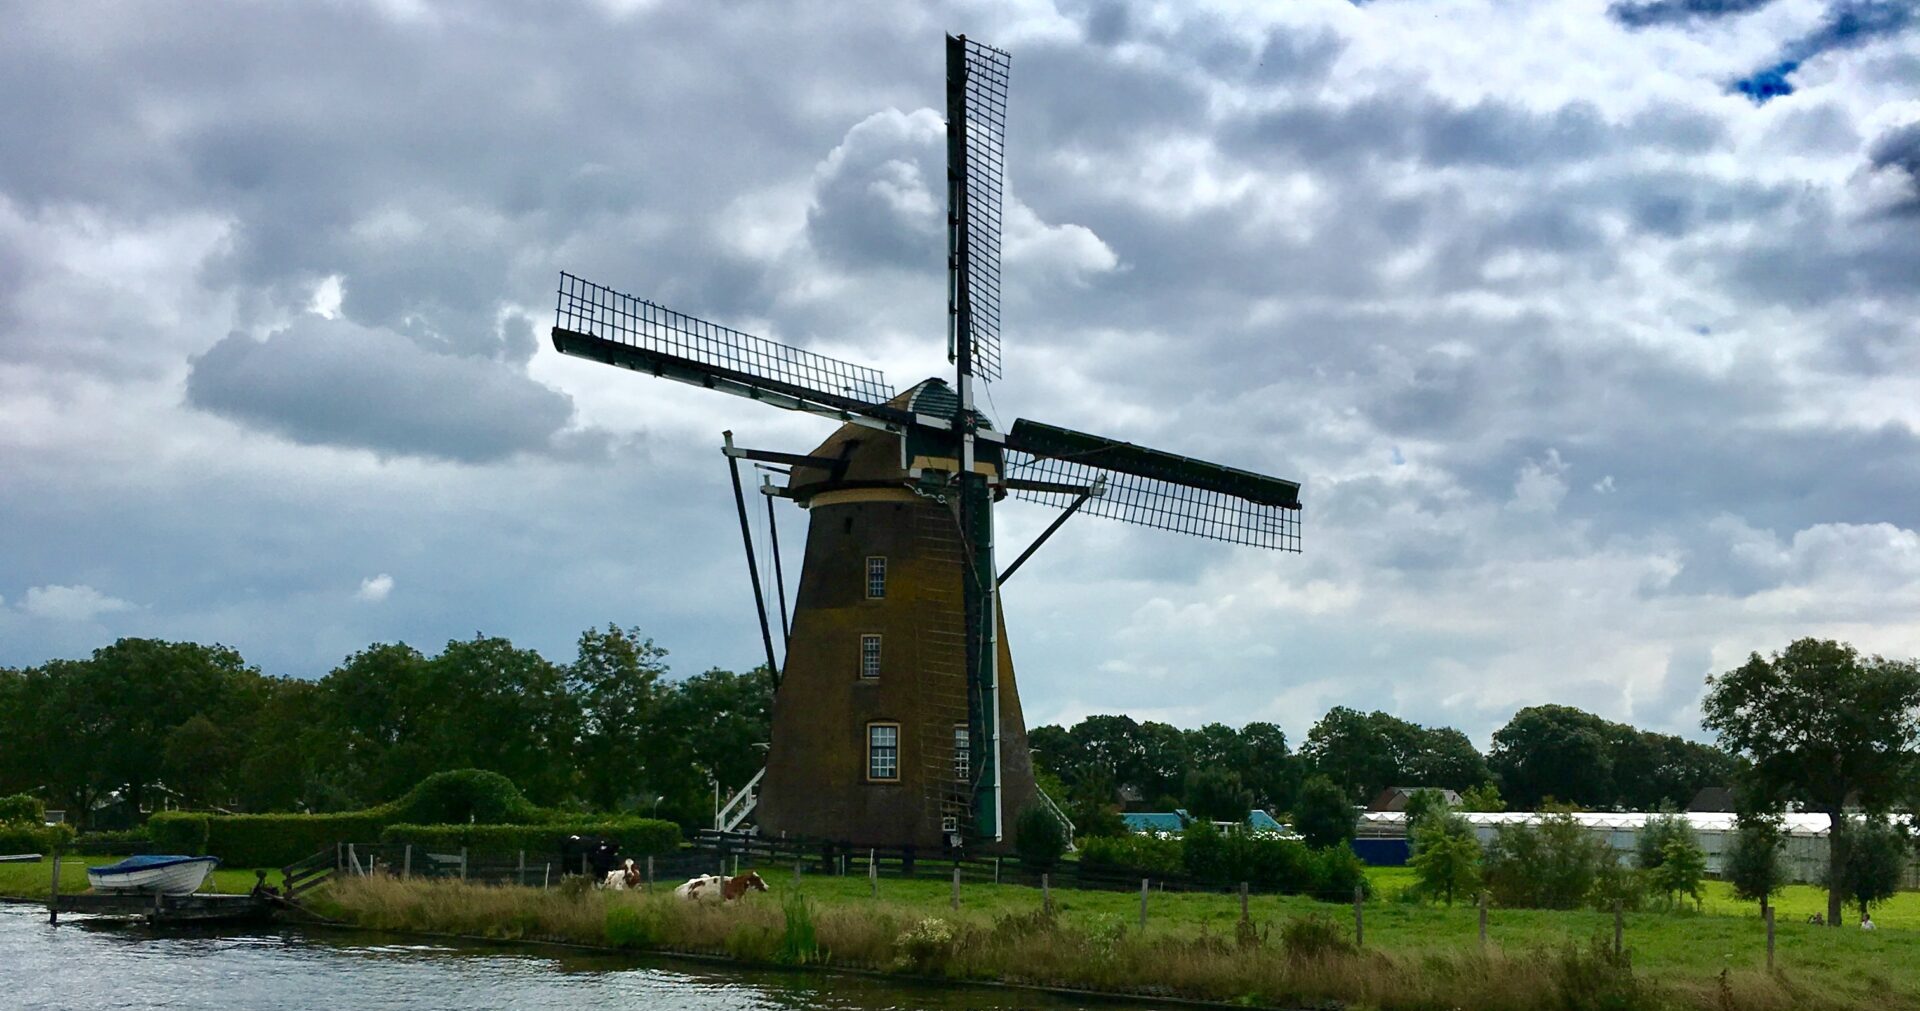 2017 August: From Gouda to Leiden